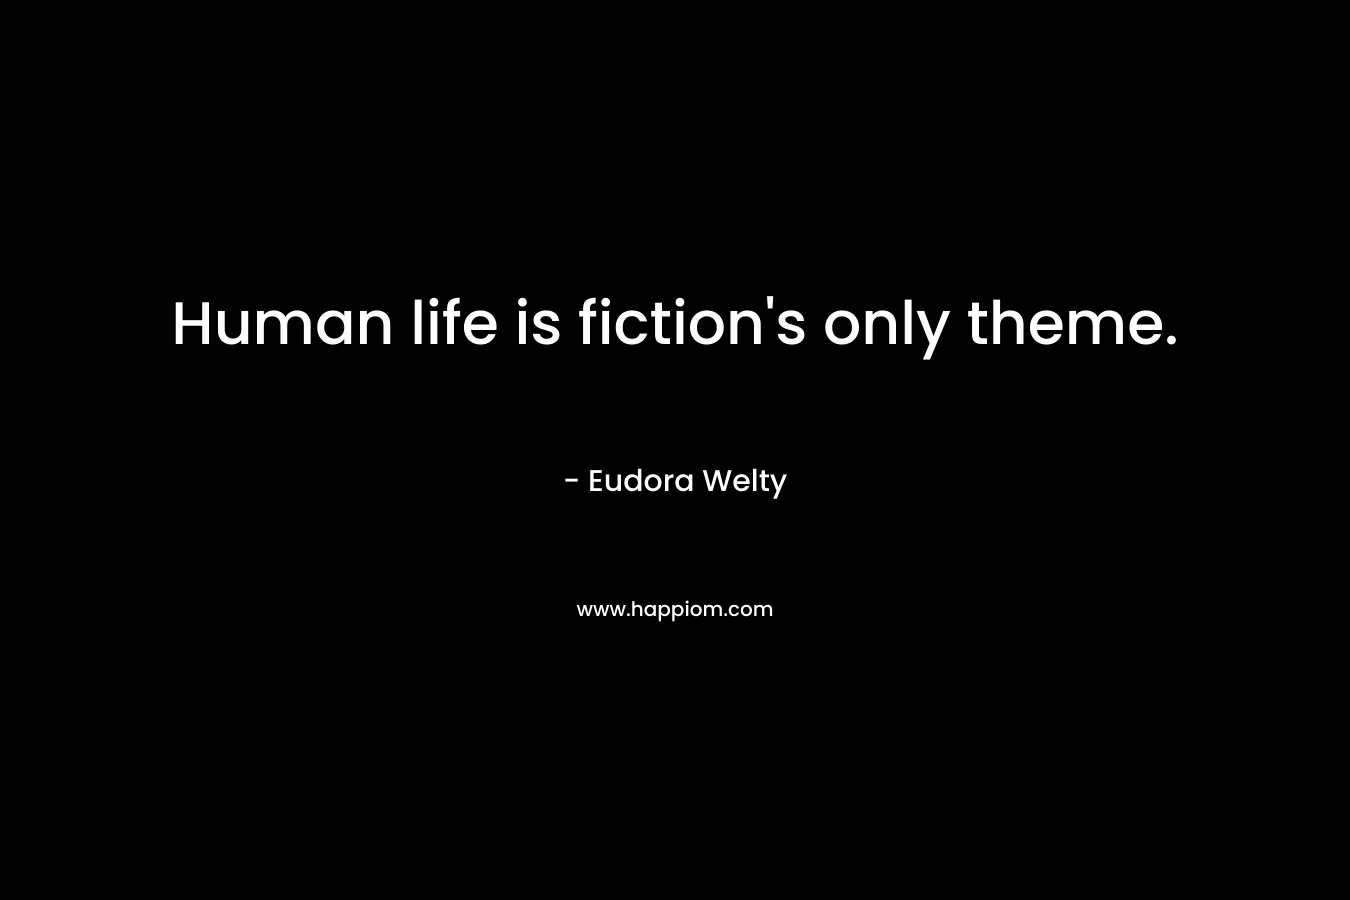 Human life is fiction's only theme.